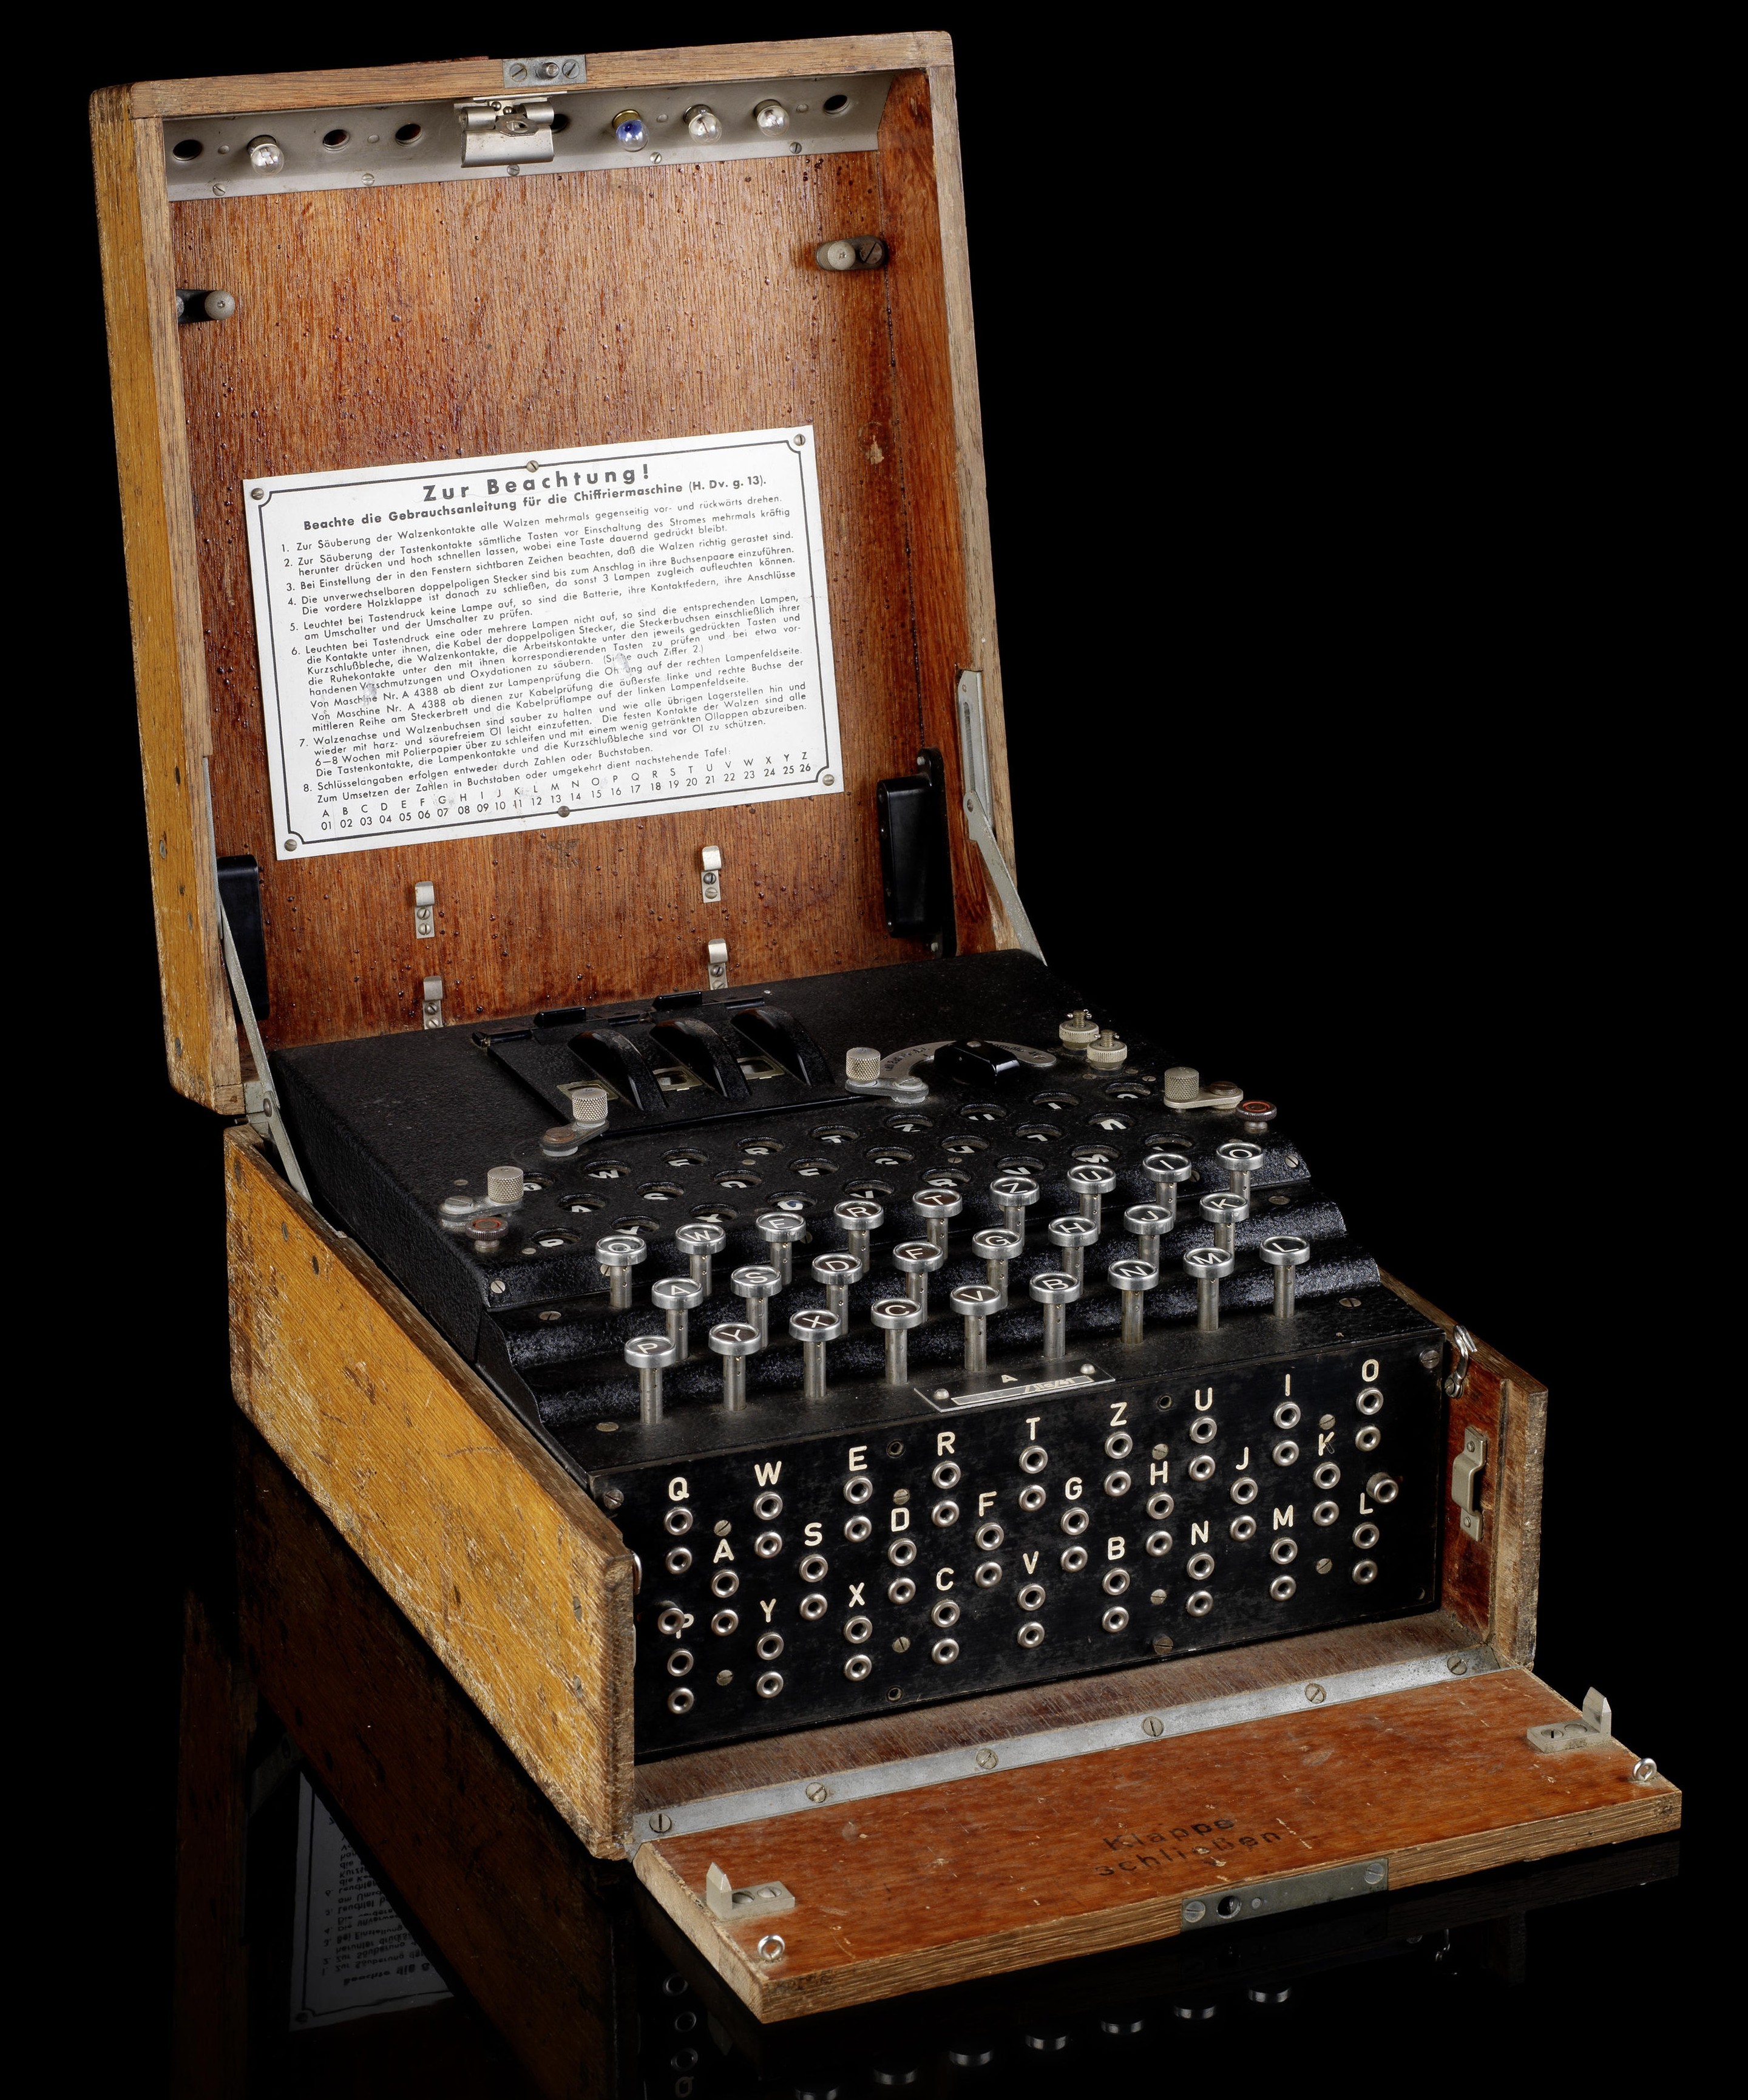 On This Day In 1941 The Enigma Key Was “broken”